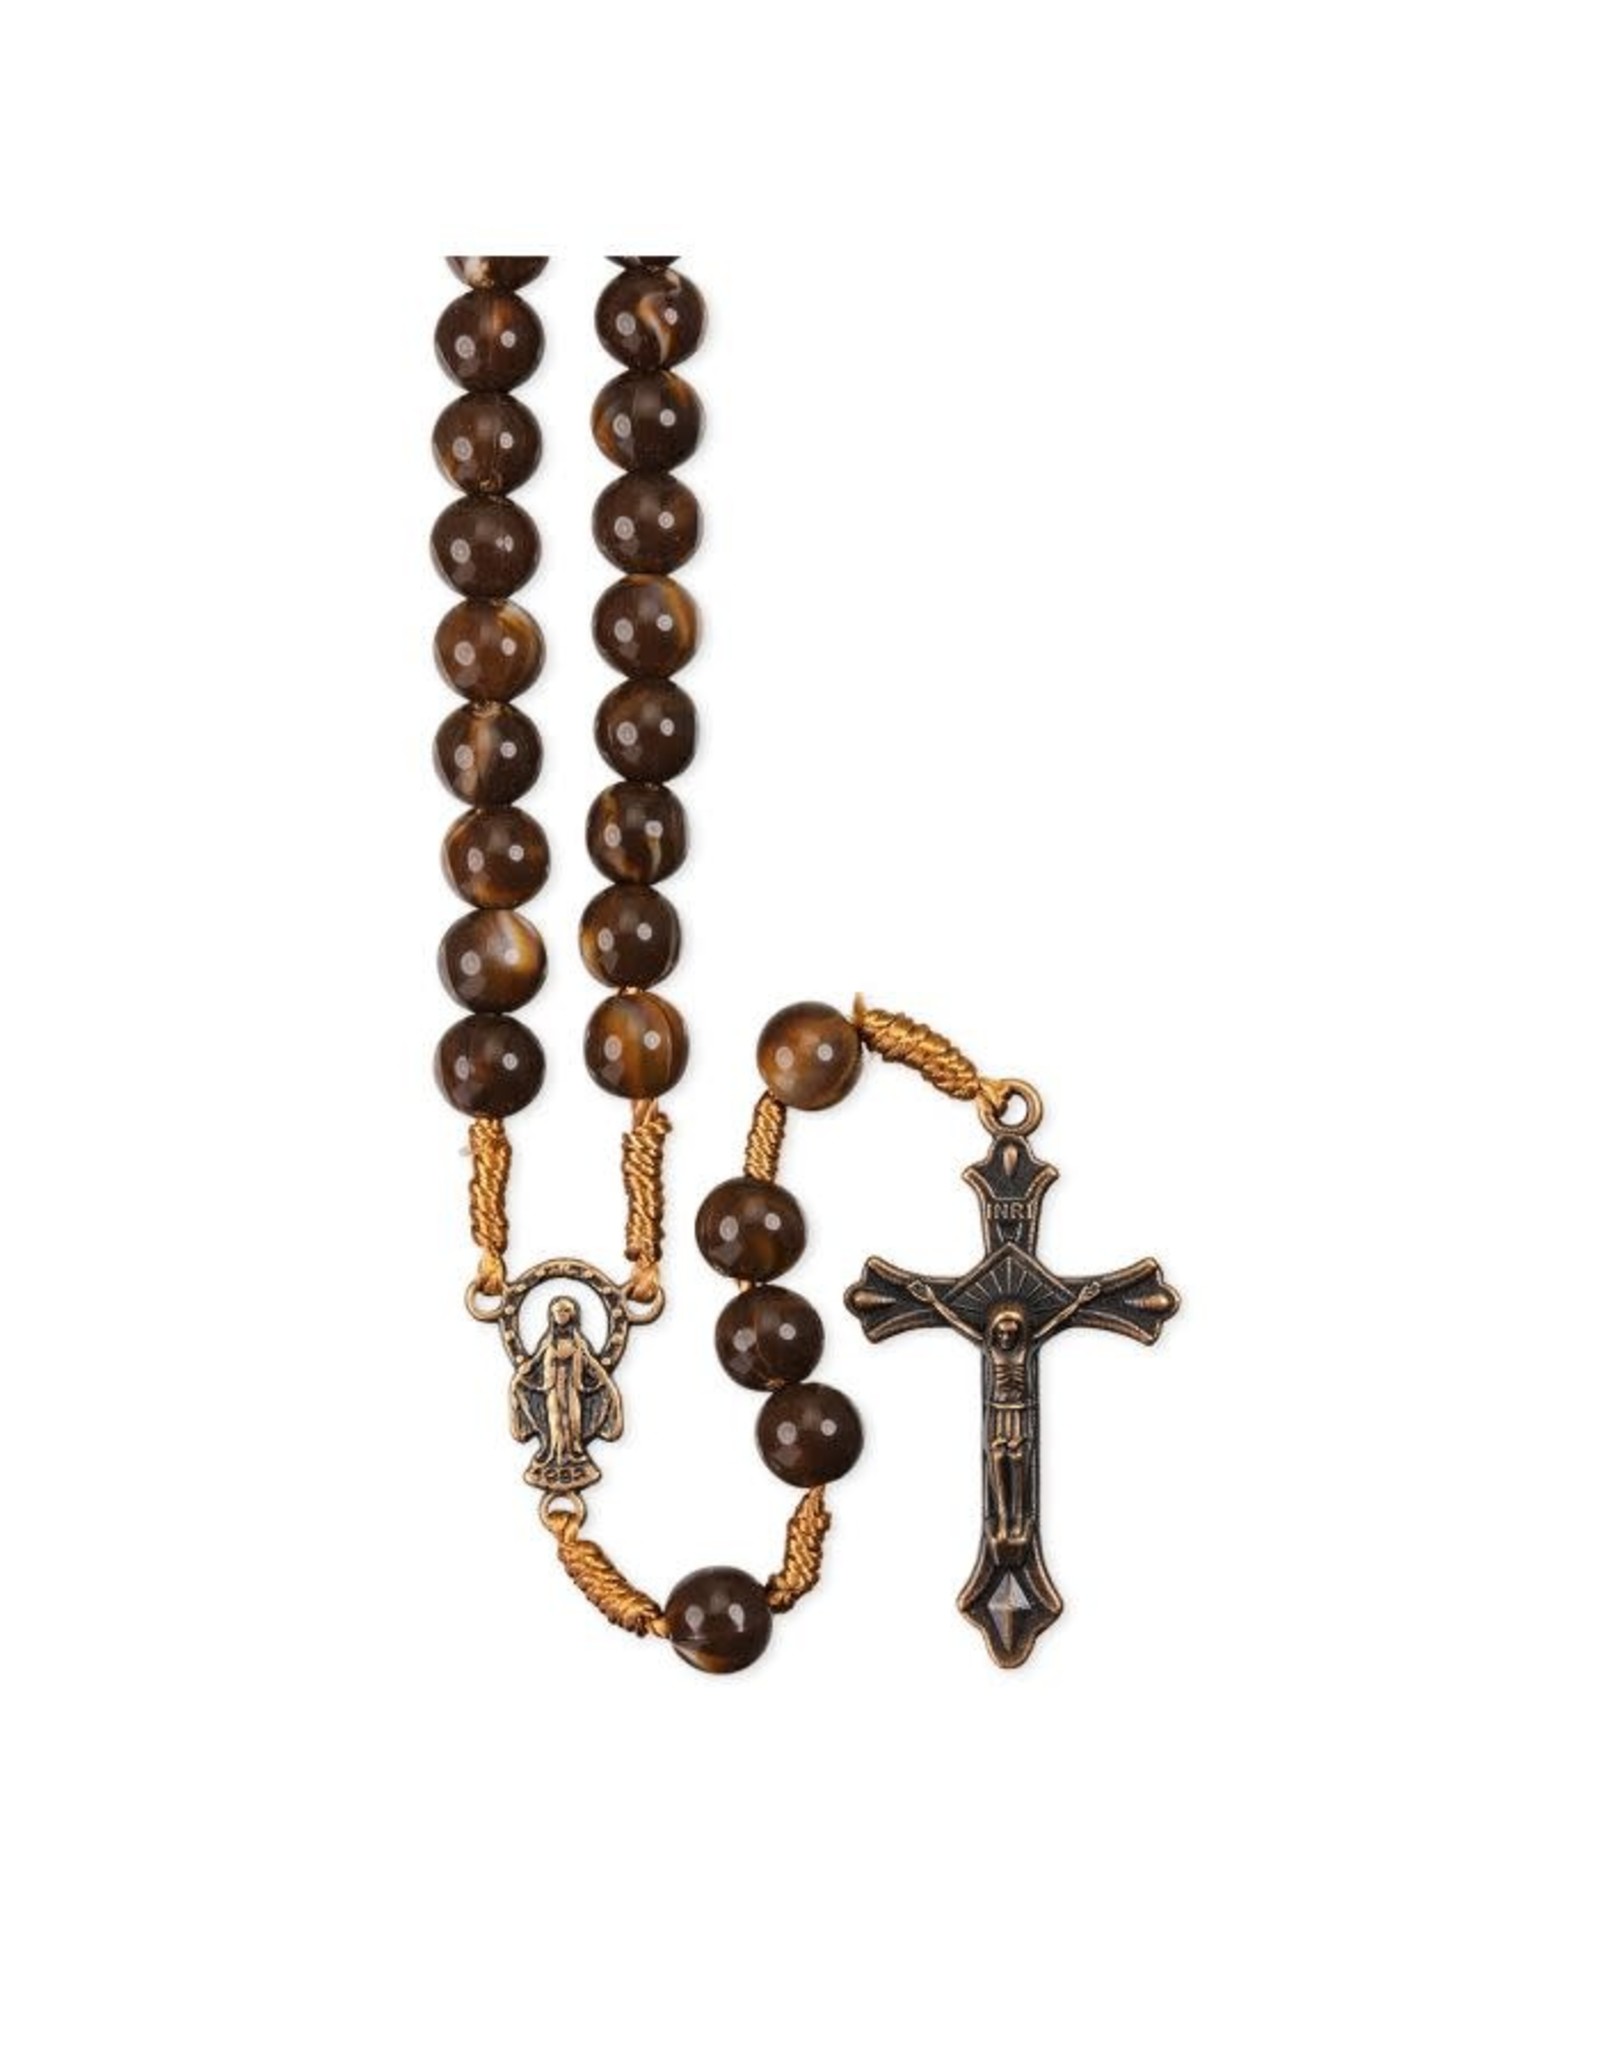 Hirten Rosary - Marbleized Brown Copper Beads on Cord